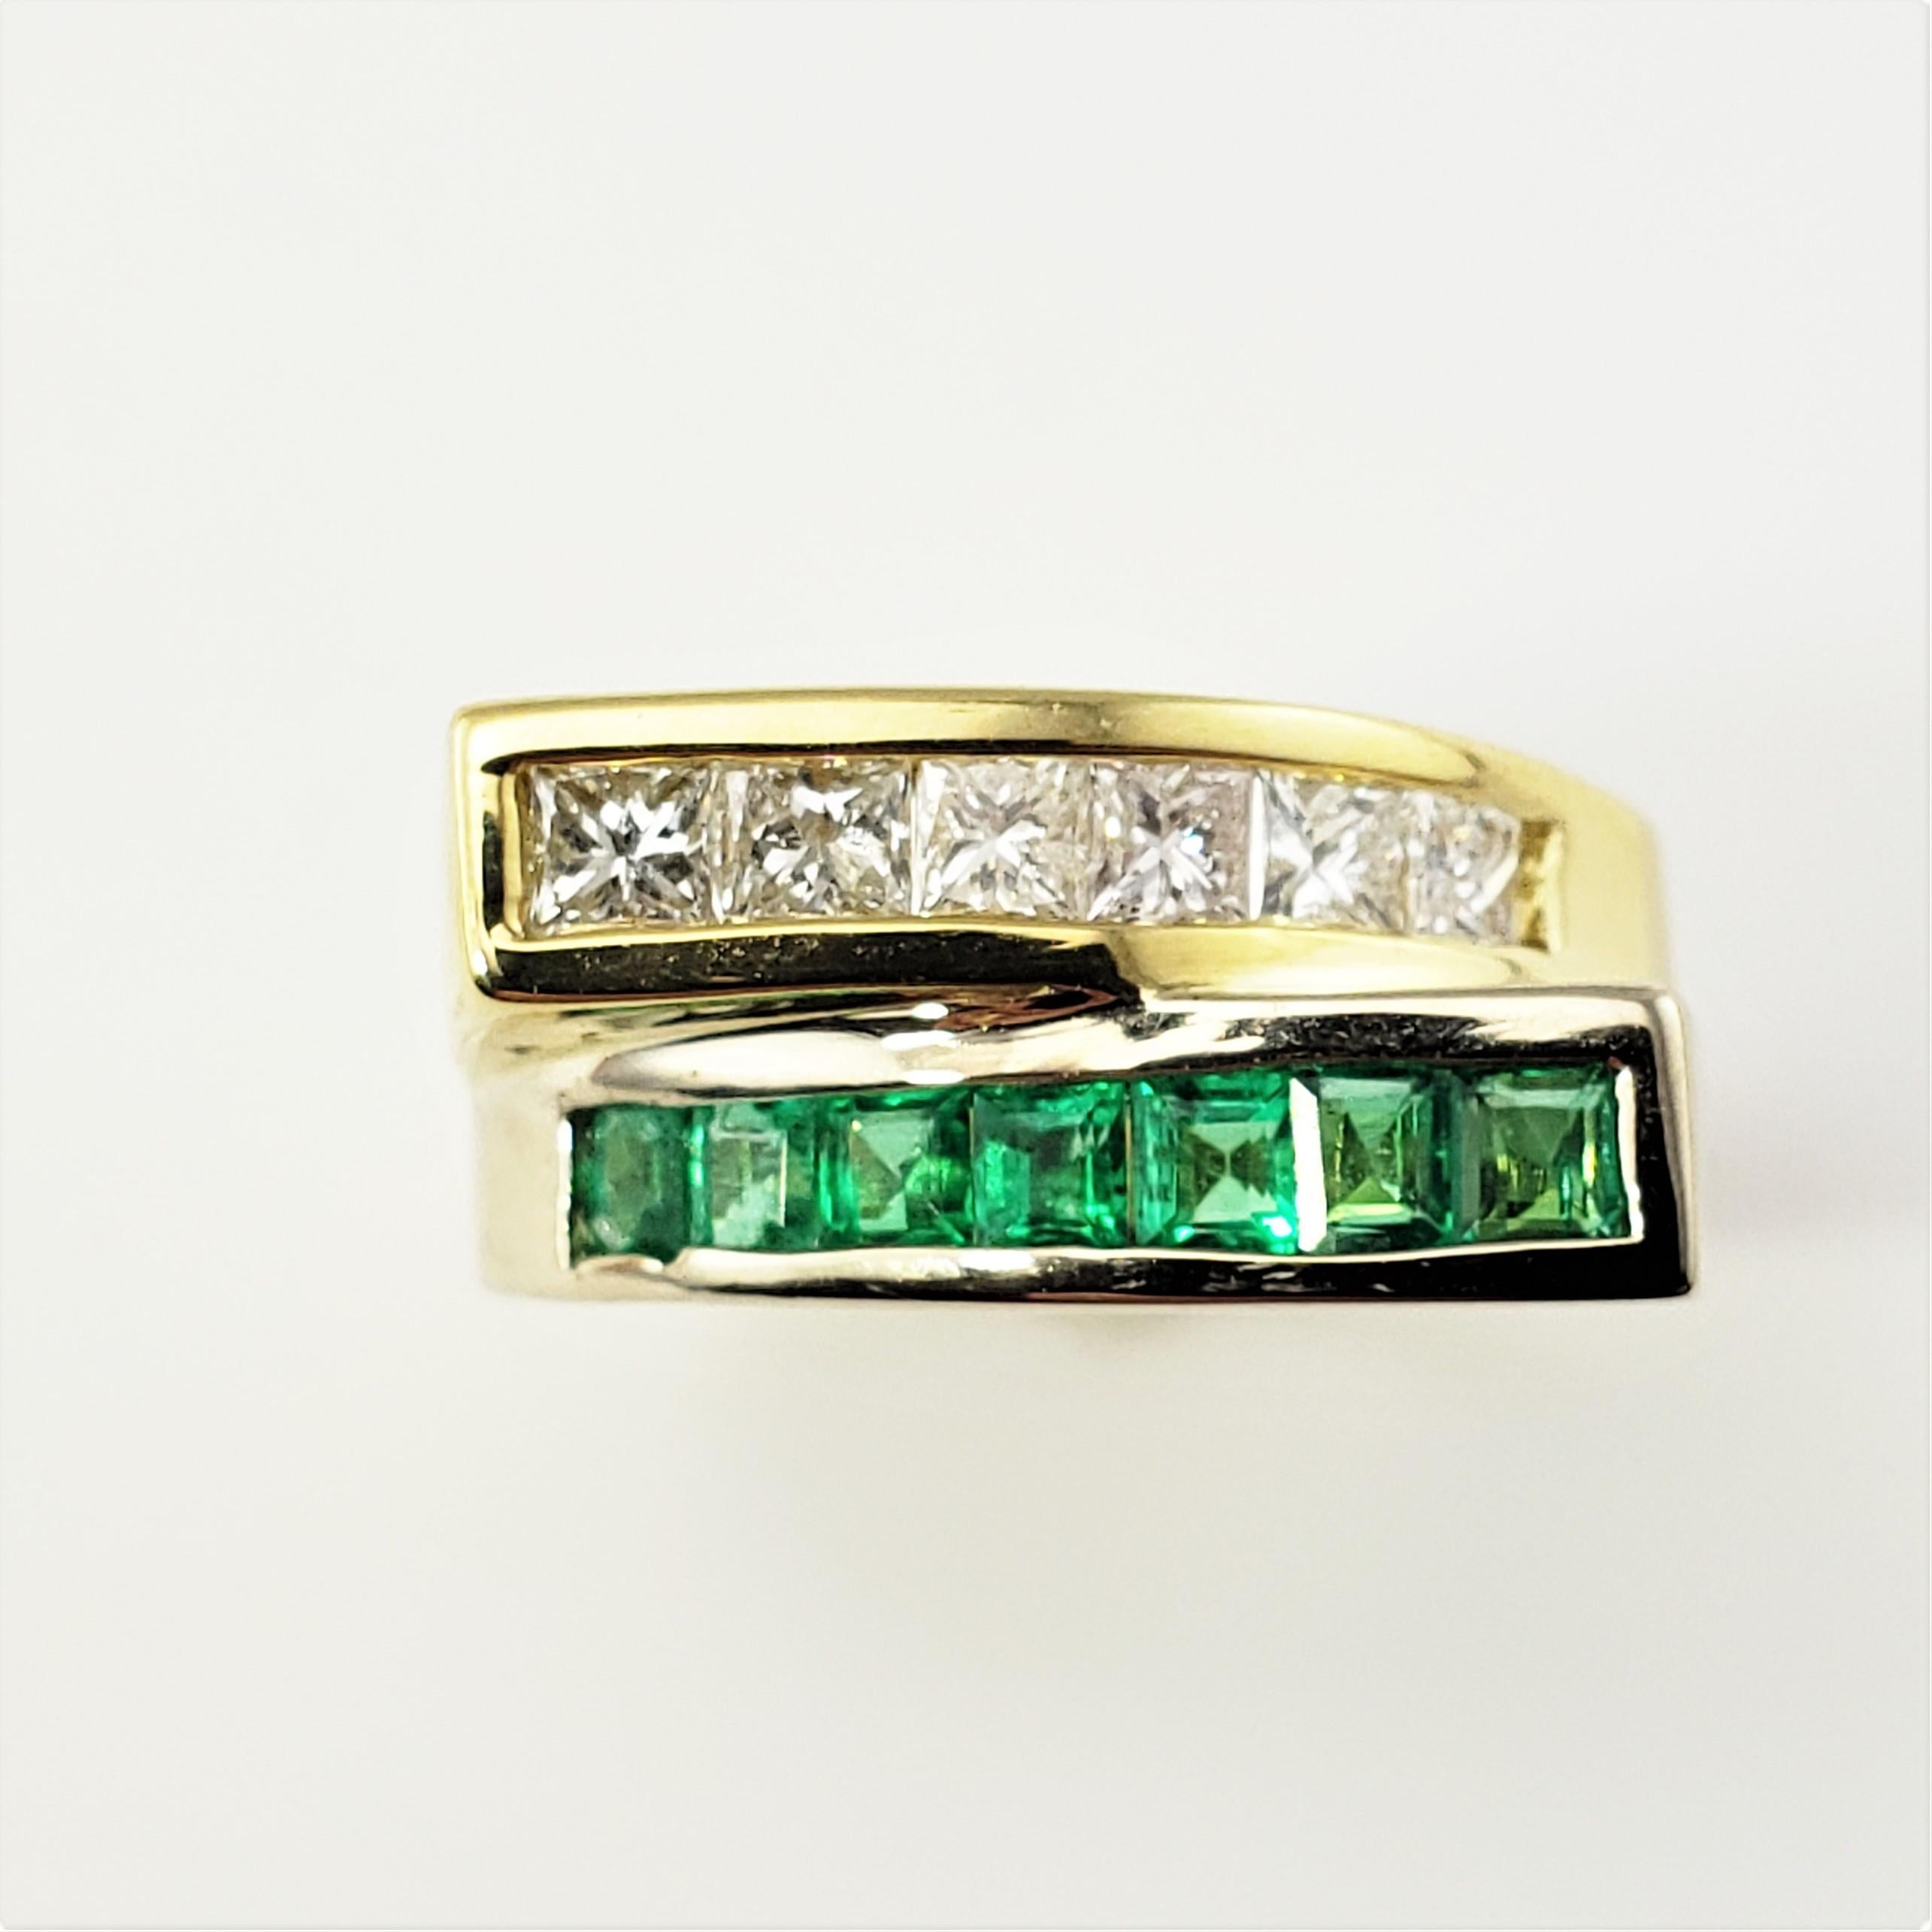 Vintage 18 Karat Yellow Gold Emerald and Diamond Ring Size 6.75 GAI Certified -

This lovely ring features seven princess cut emeralds and six princess cut diamonds set in classic 18K yellow gold. Width: 9 mm.
Shank: 5 mm.

Approximate total diamond